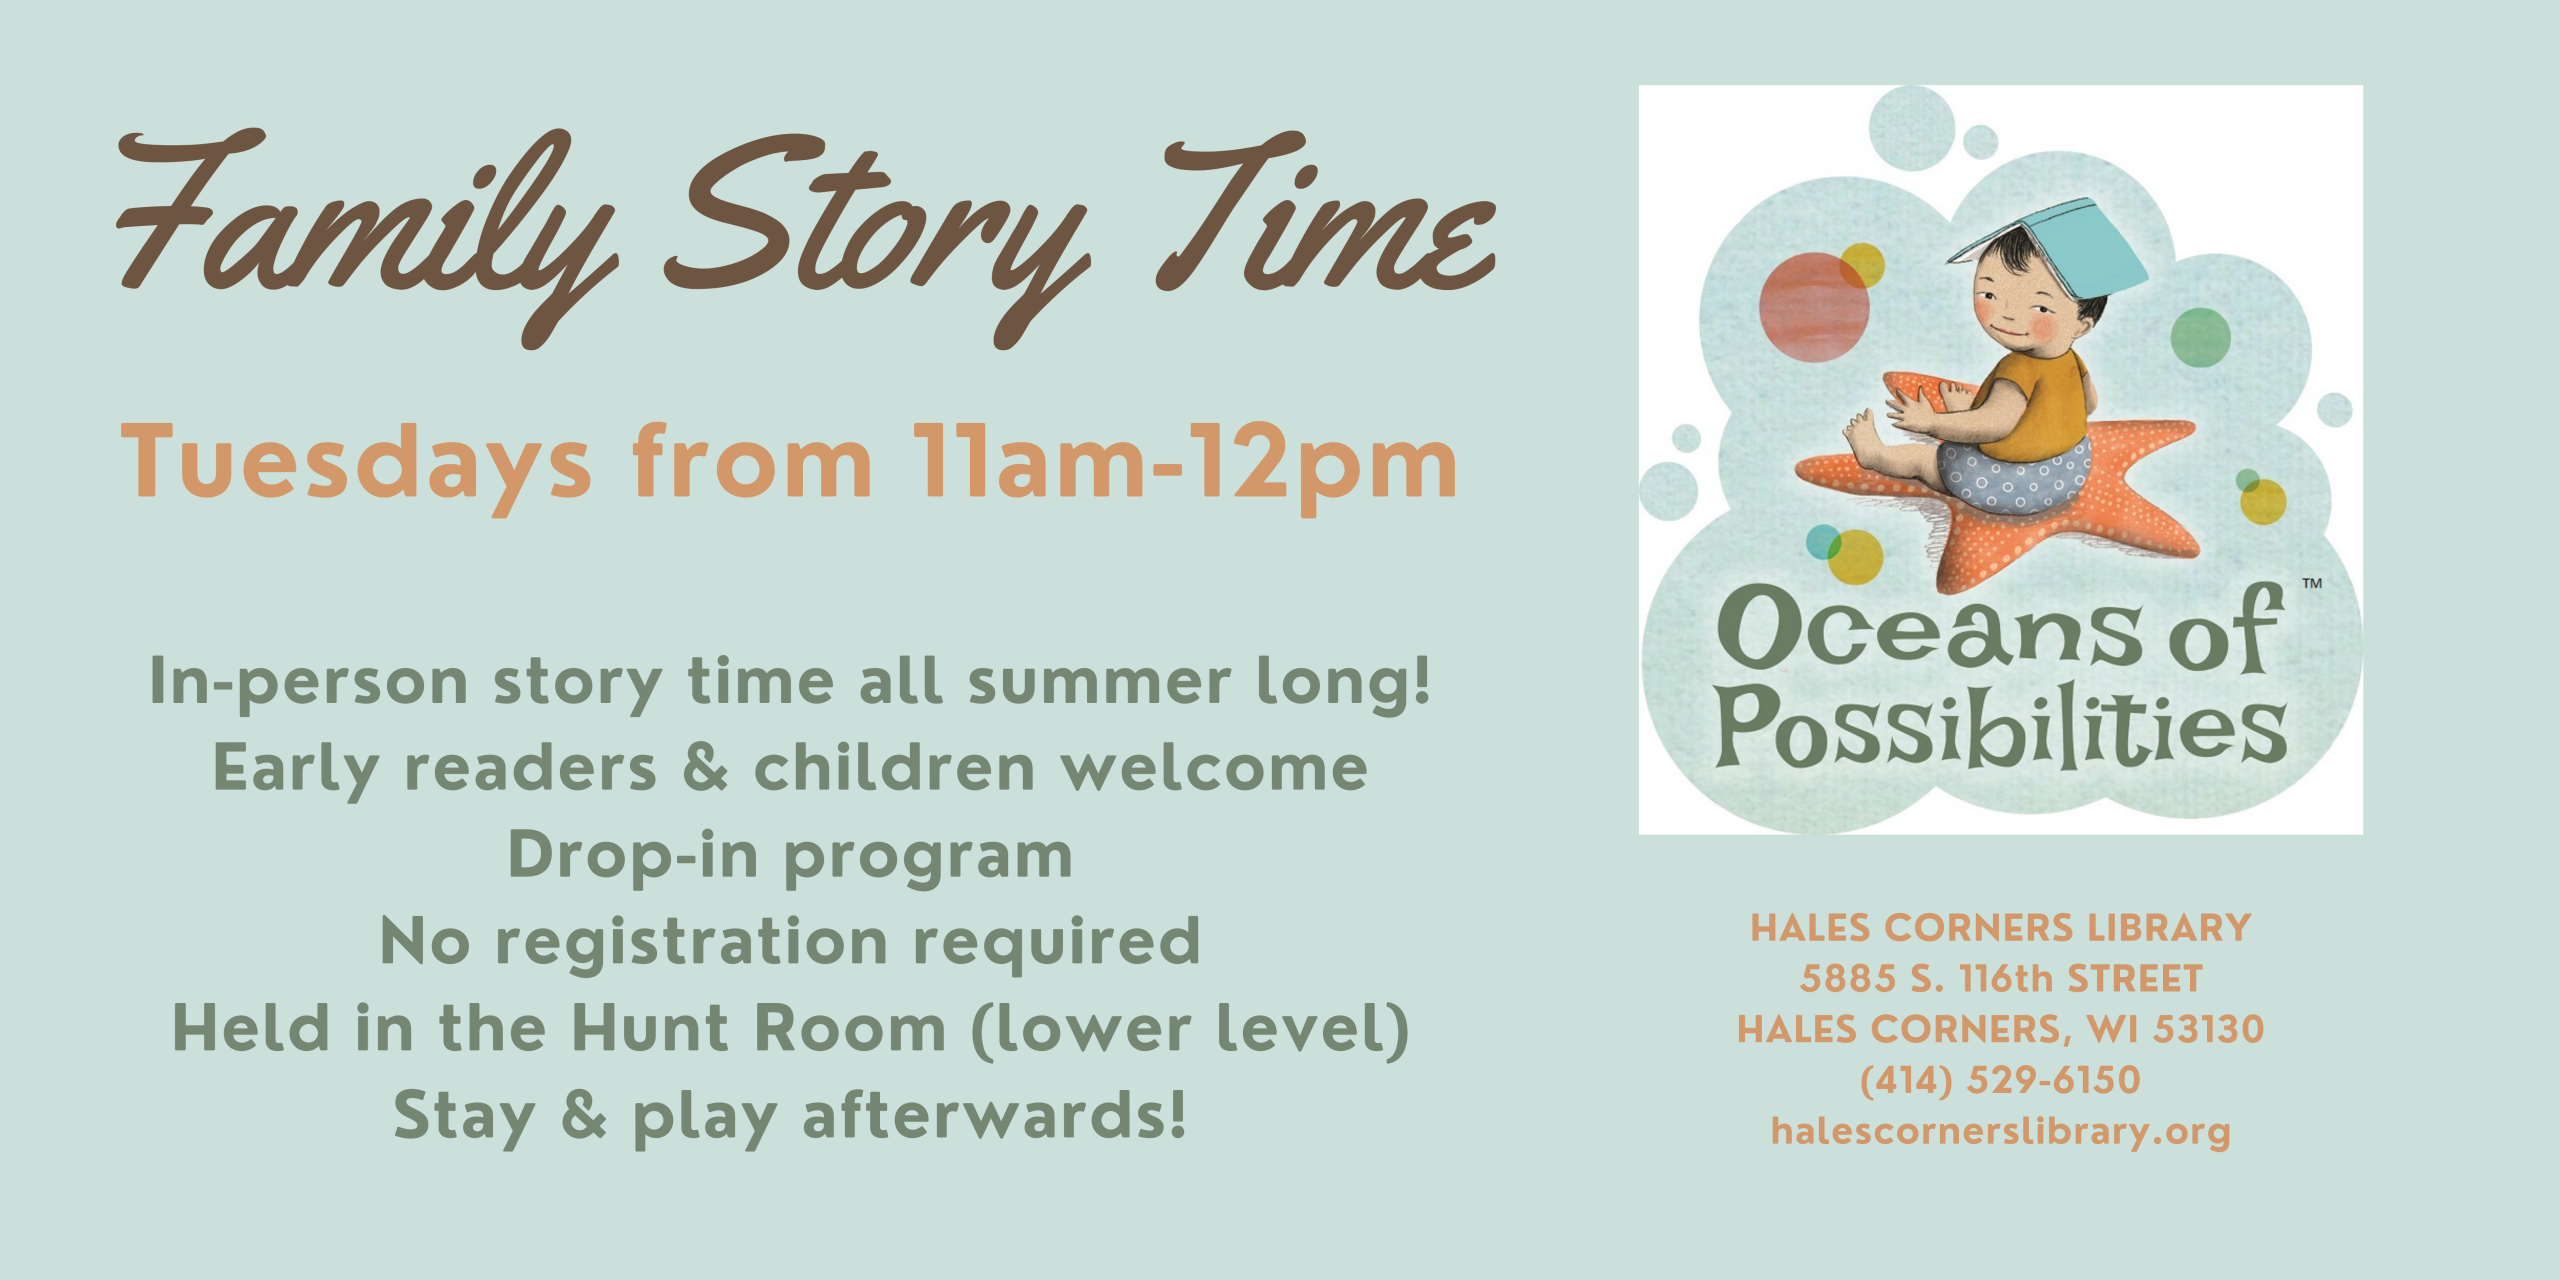 Summer Story Time Tuesdays at 11am